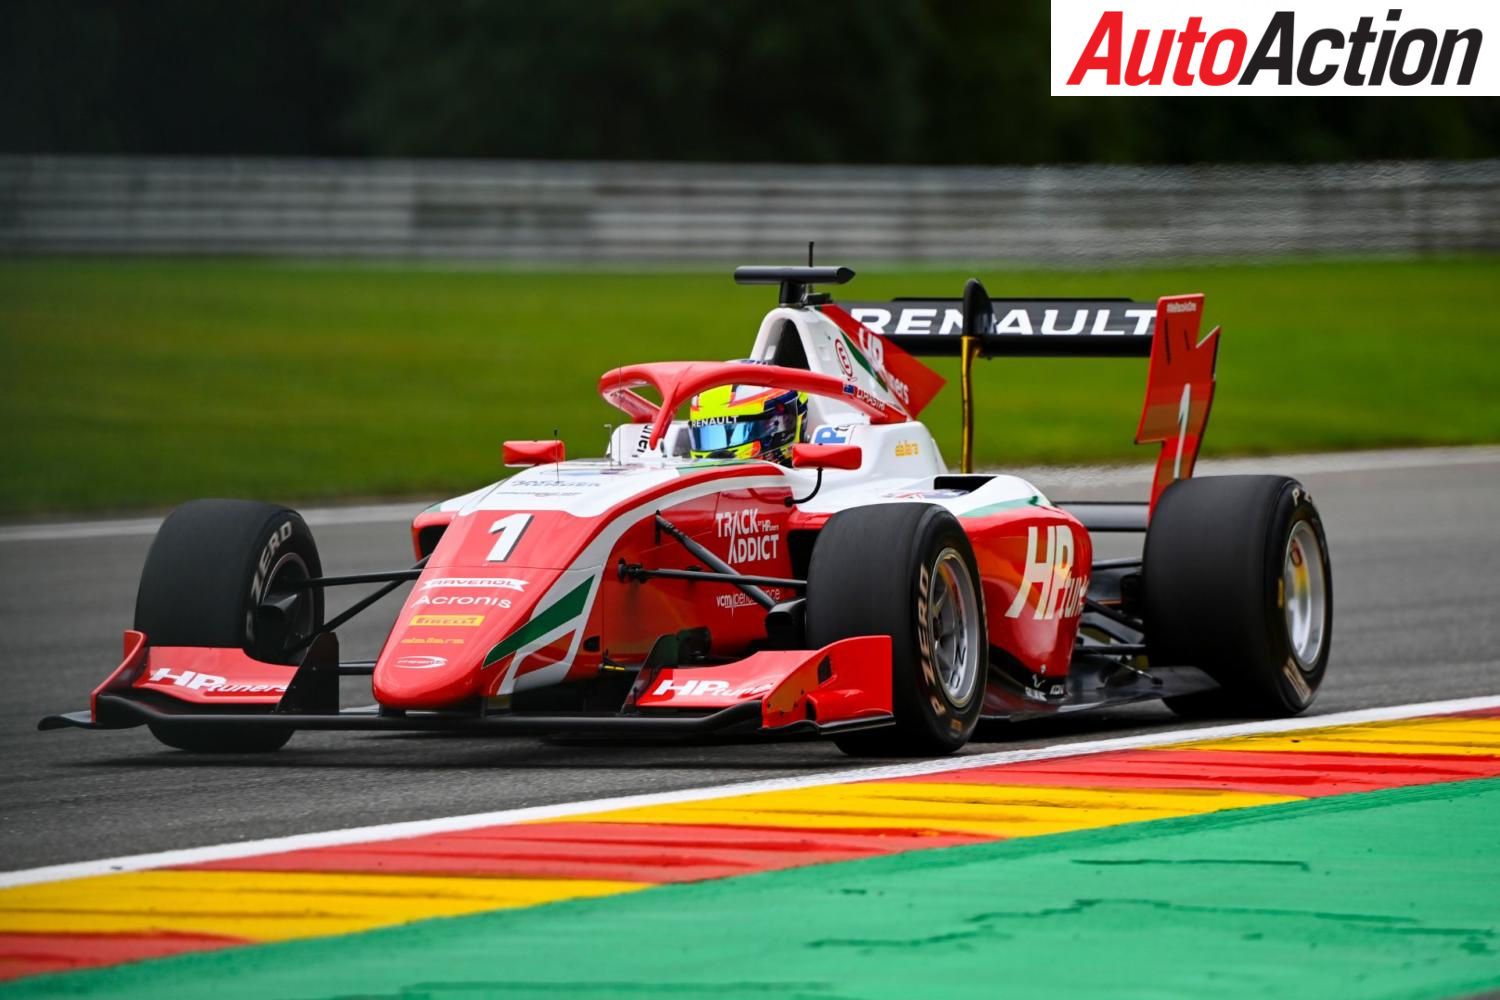 Aussies caught out in F3 qualifying at Spa - Photo: Suttons